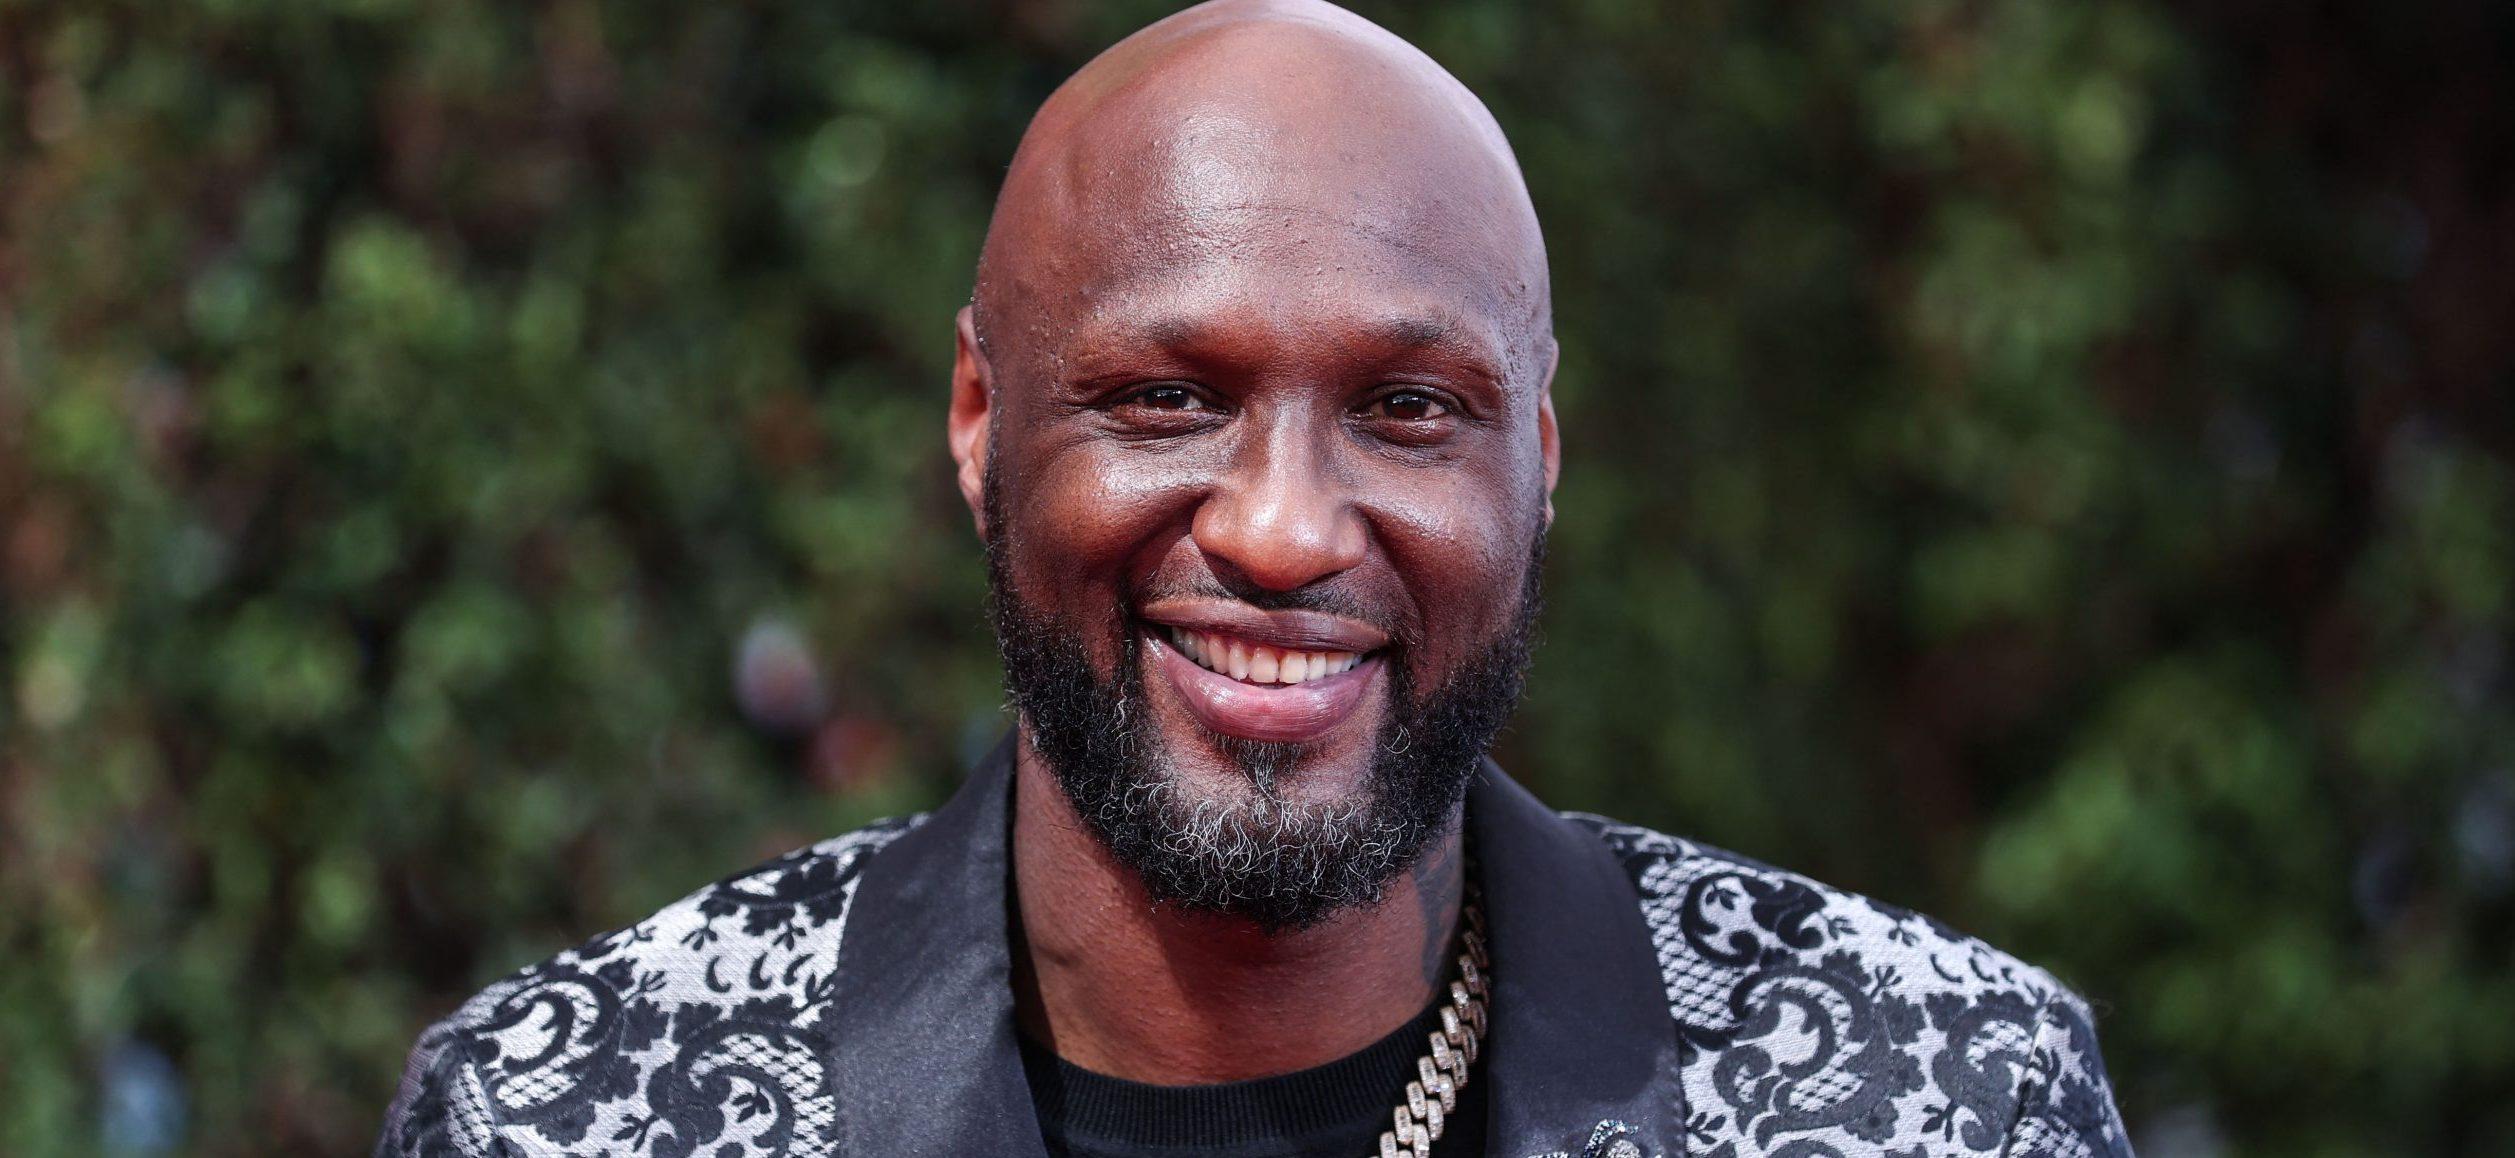 Lamar Odom Praised After Opening Addiction Treatment Centres: ‘God Saved Me So I Can Save Others’